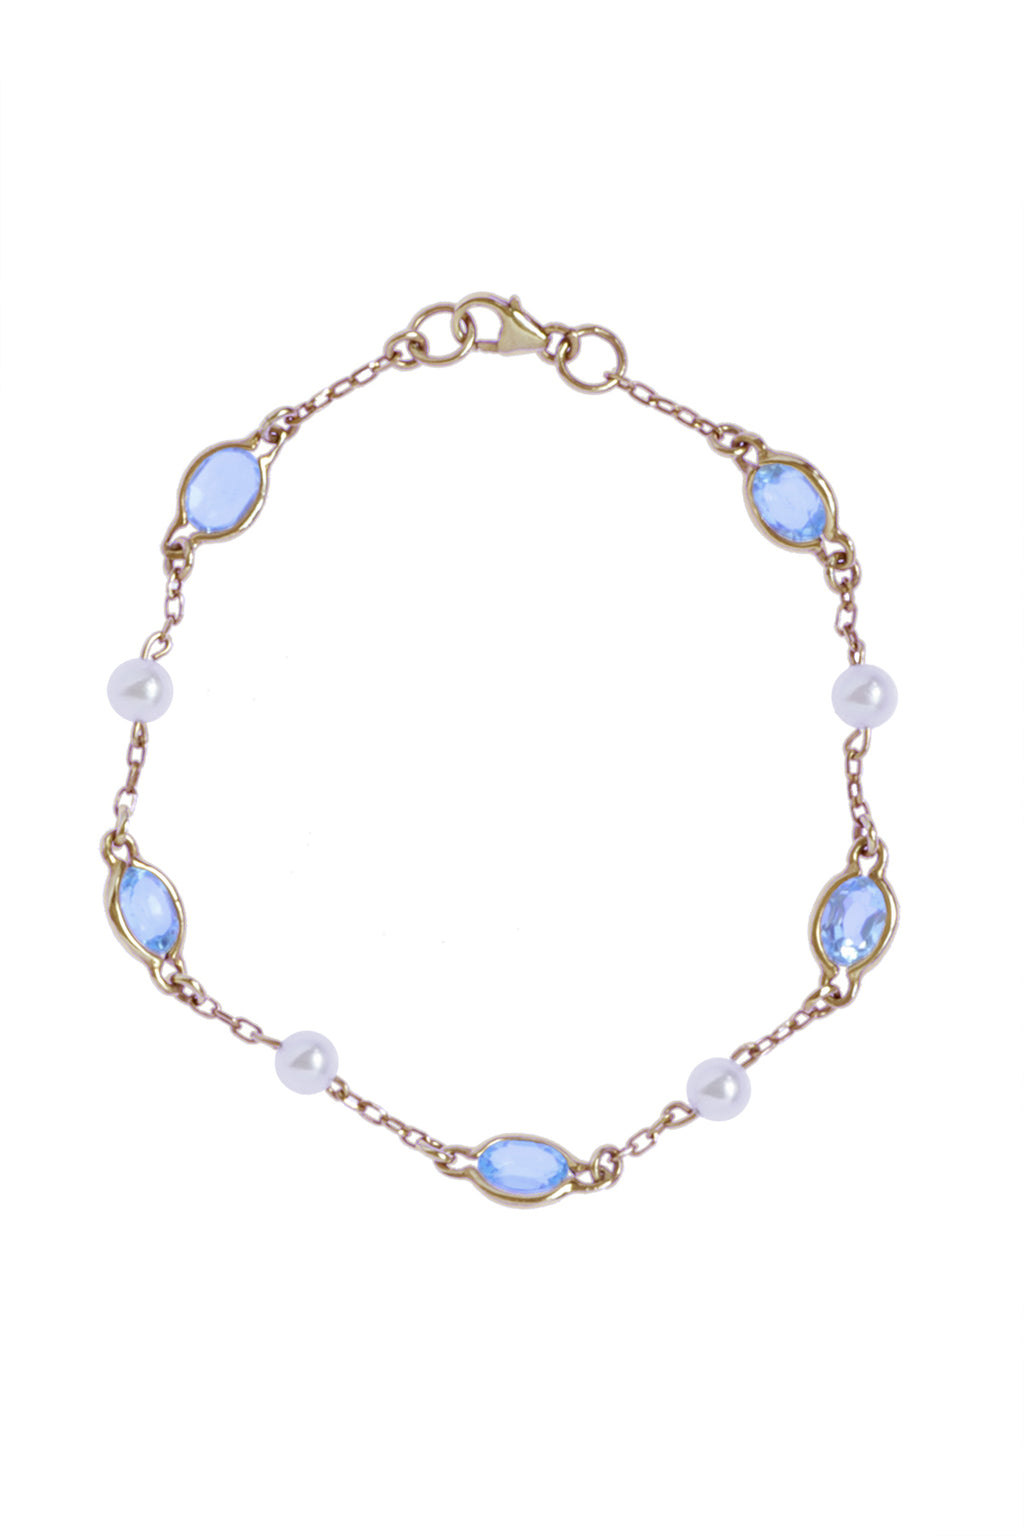 9ct Gold Bracelet with Pearl & Blue Topaz